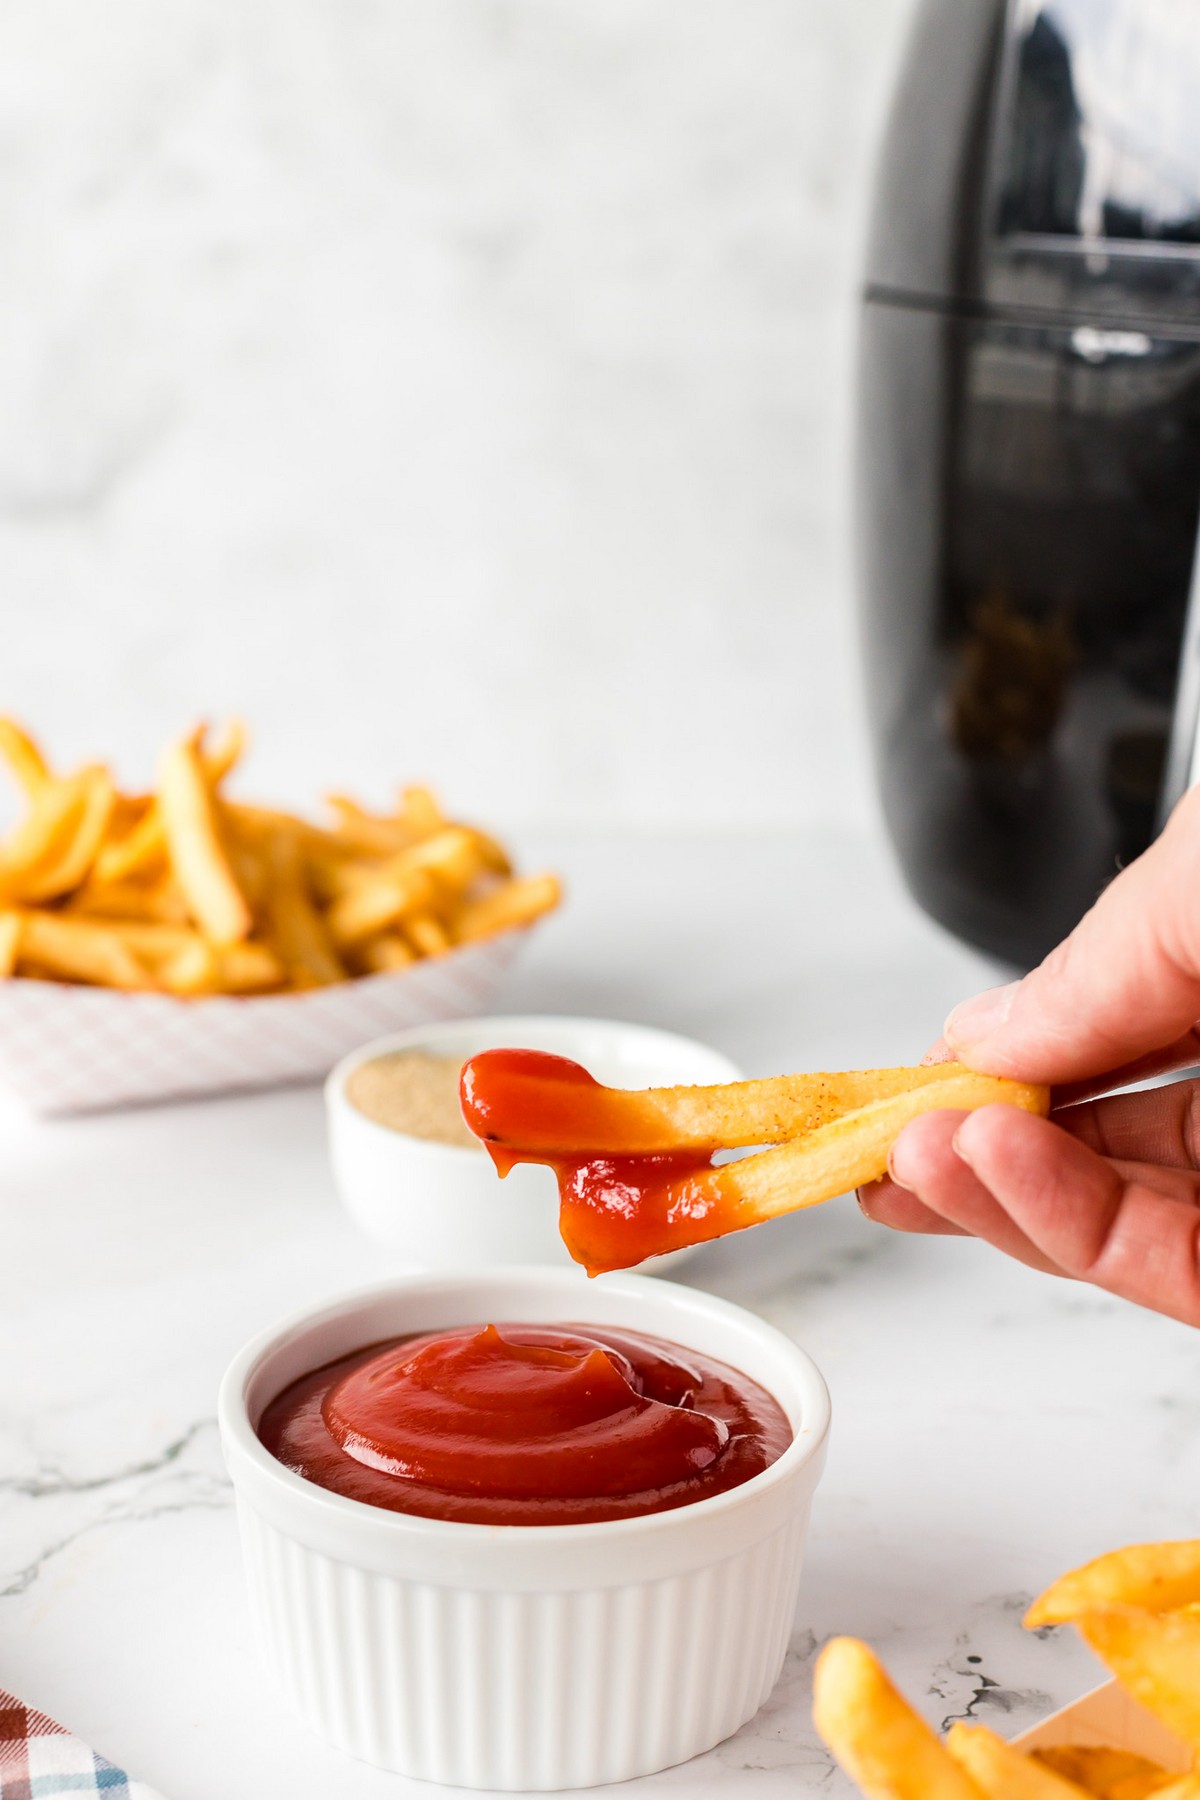 dipping fries in ketchup